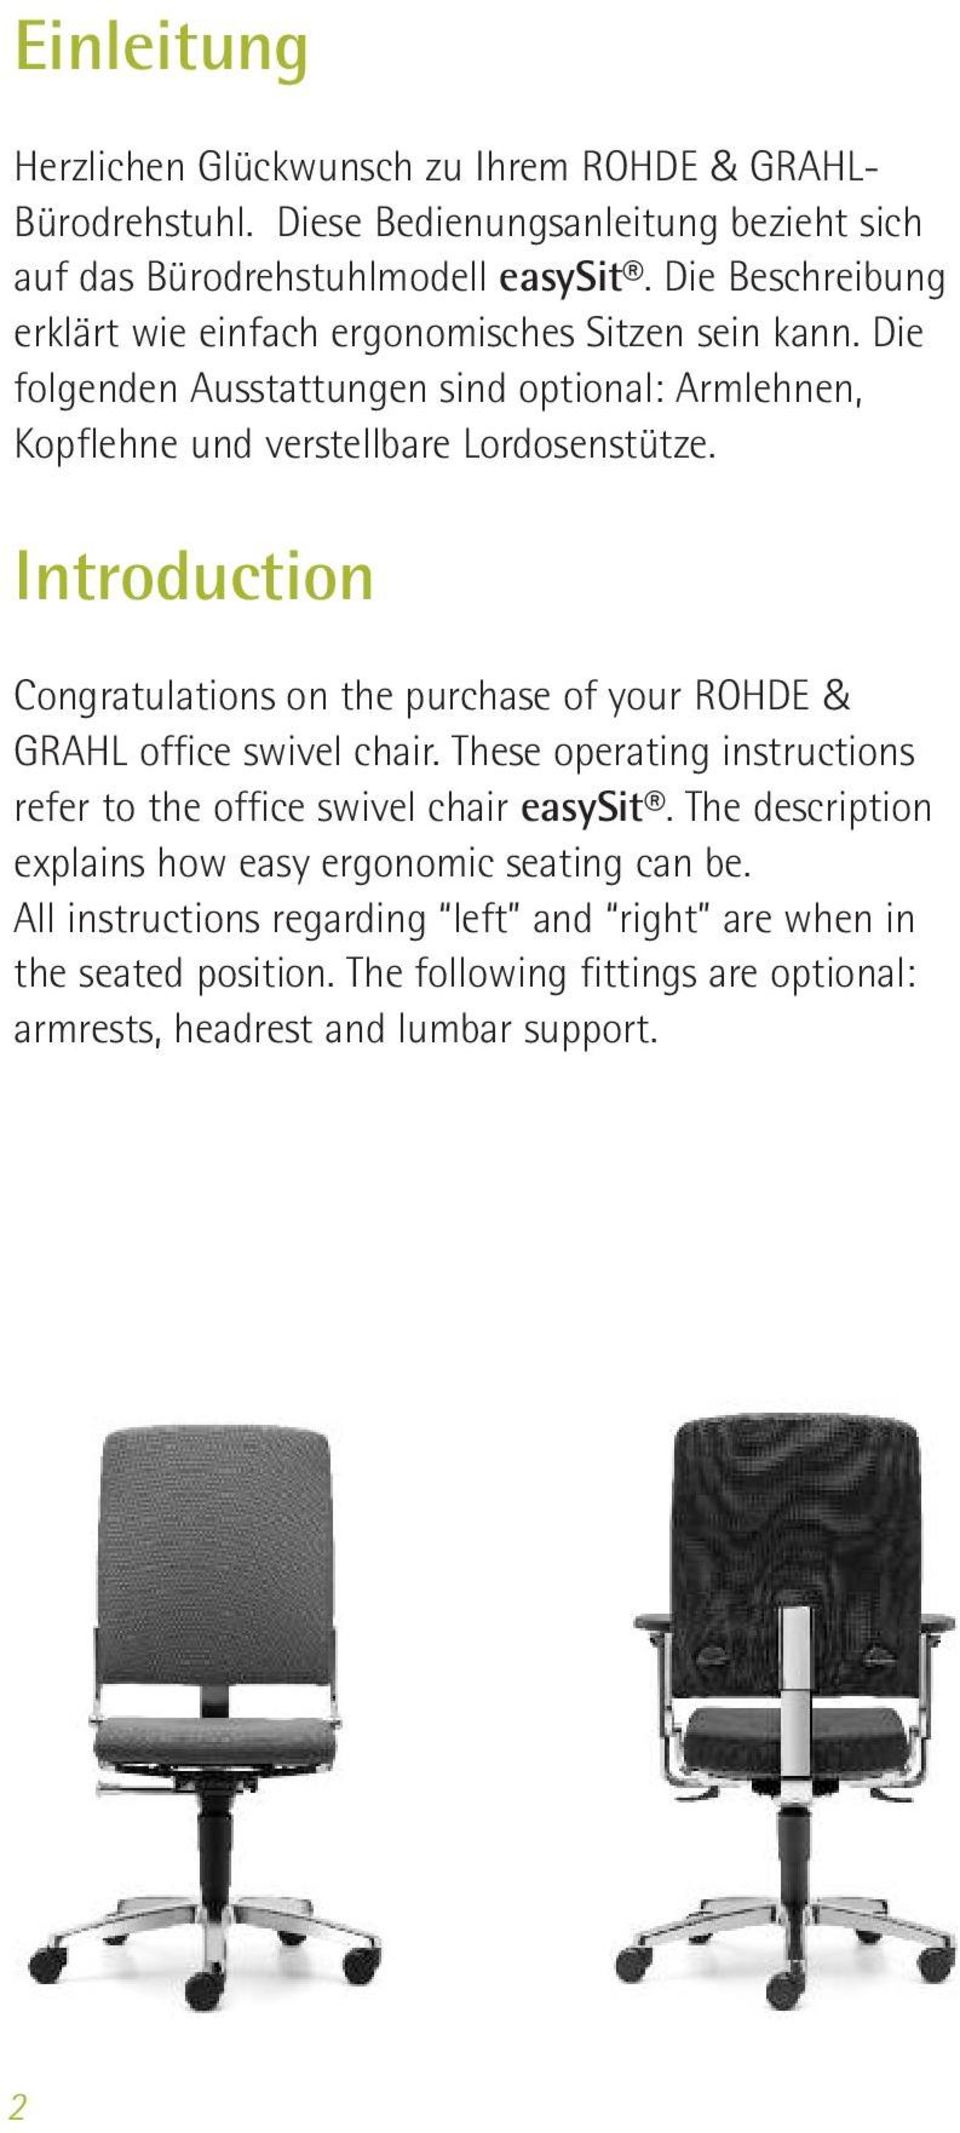 Introduction Congratulations on the purchase of your ROHDE & GRAHL office swivel chair. These operating instructions refer to the office swivel chair easysit.